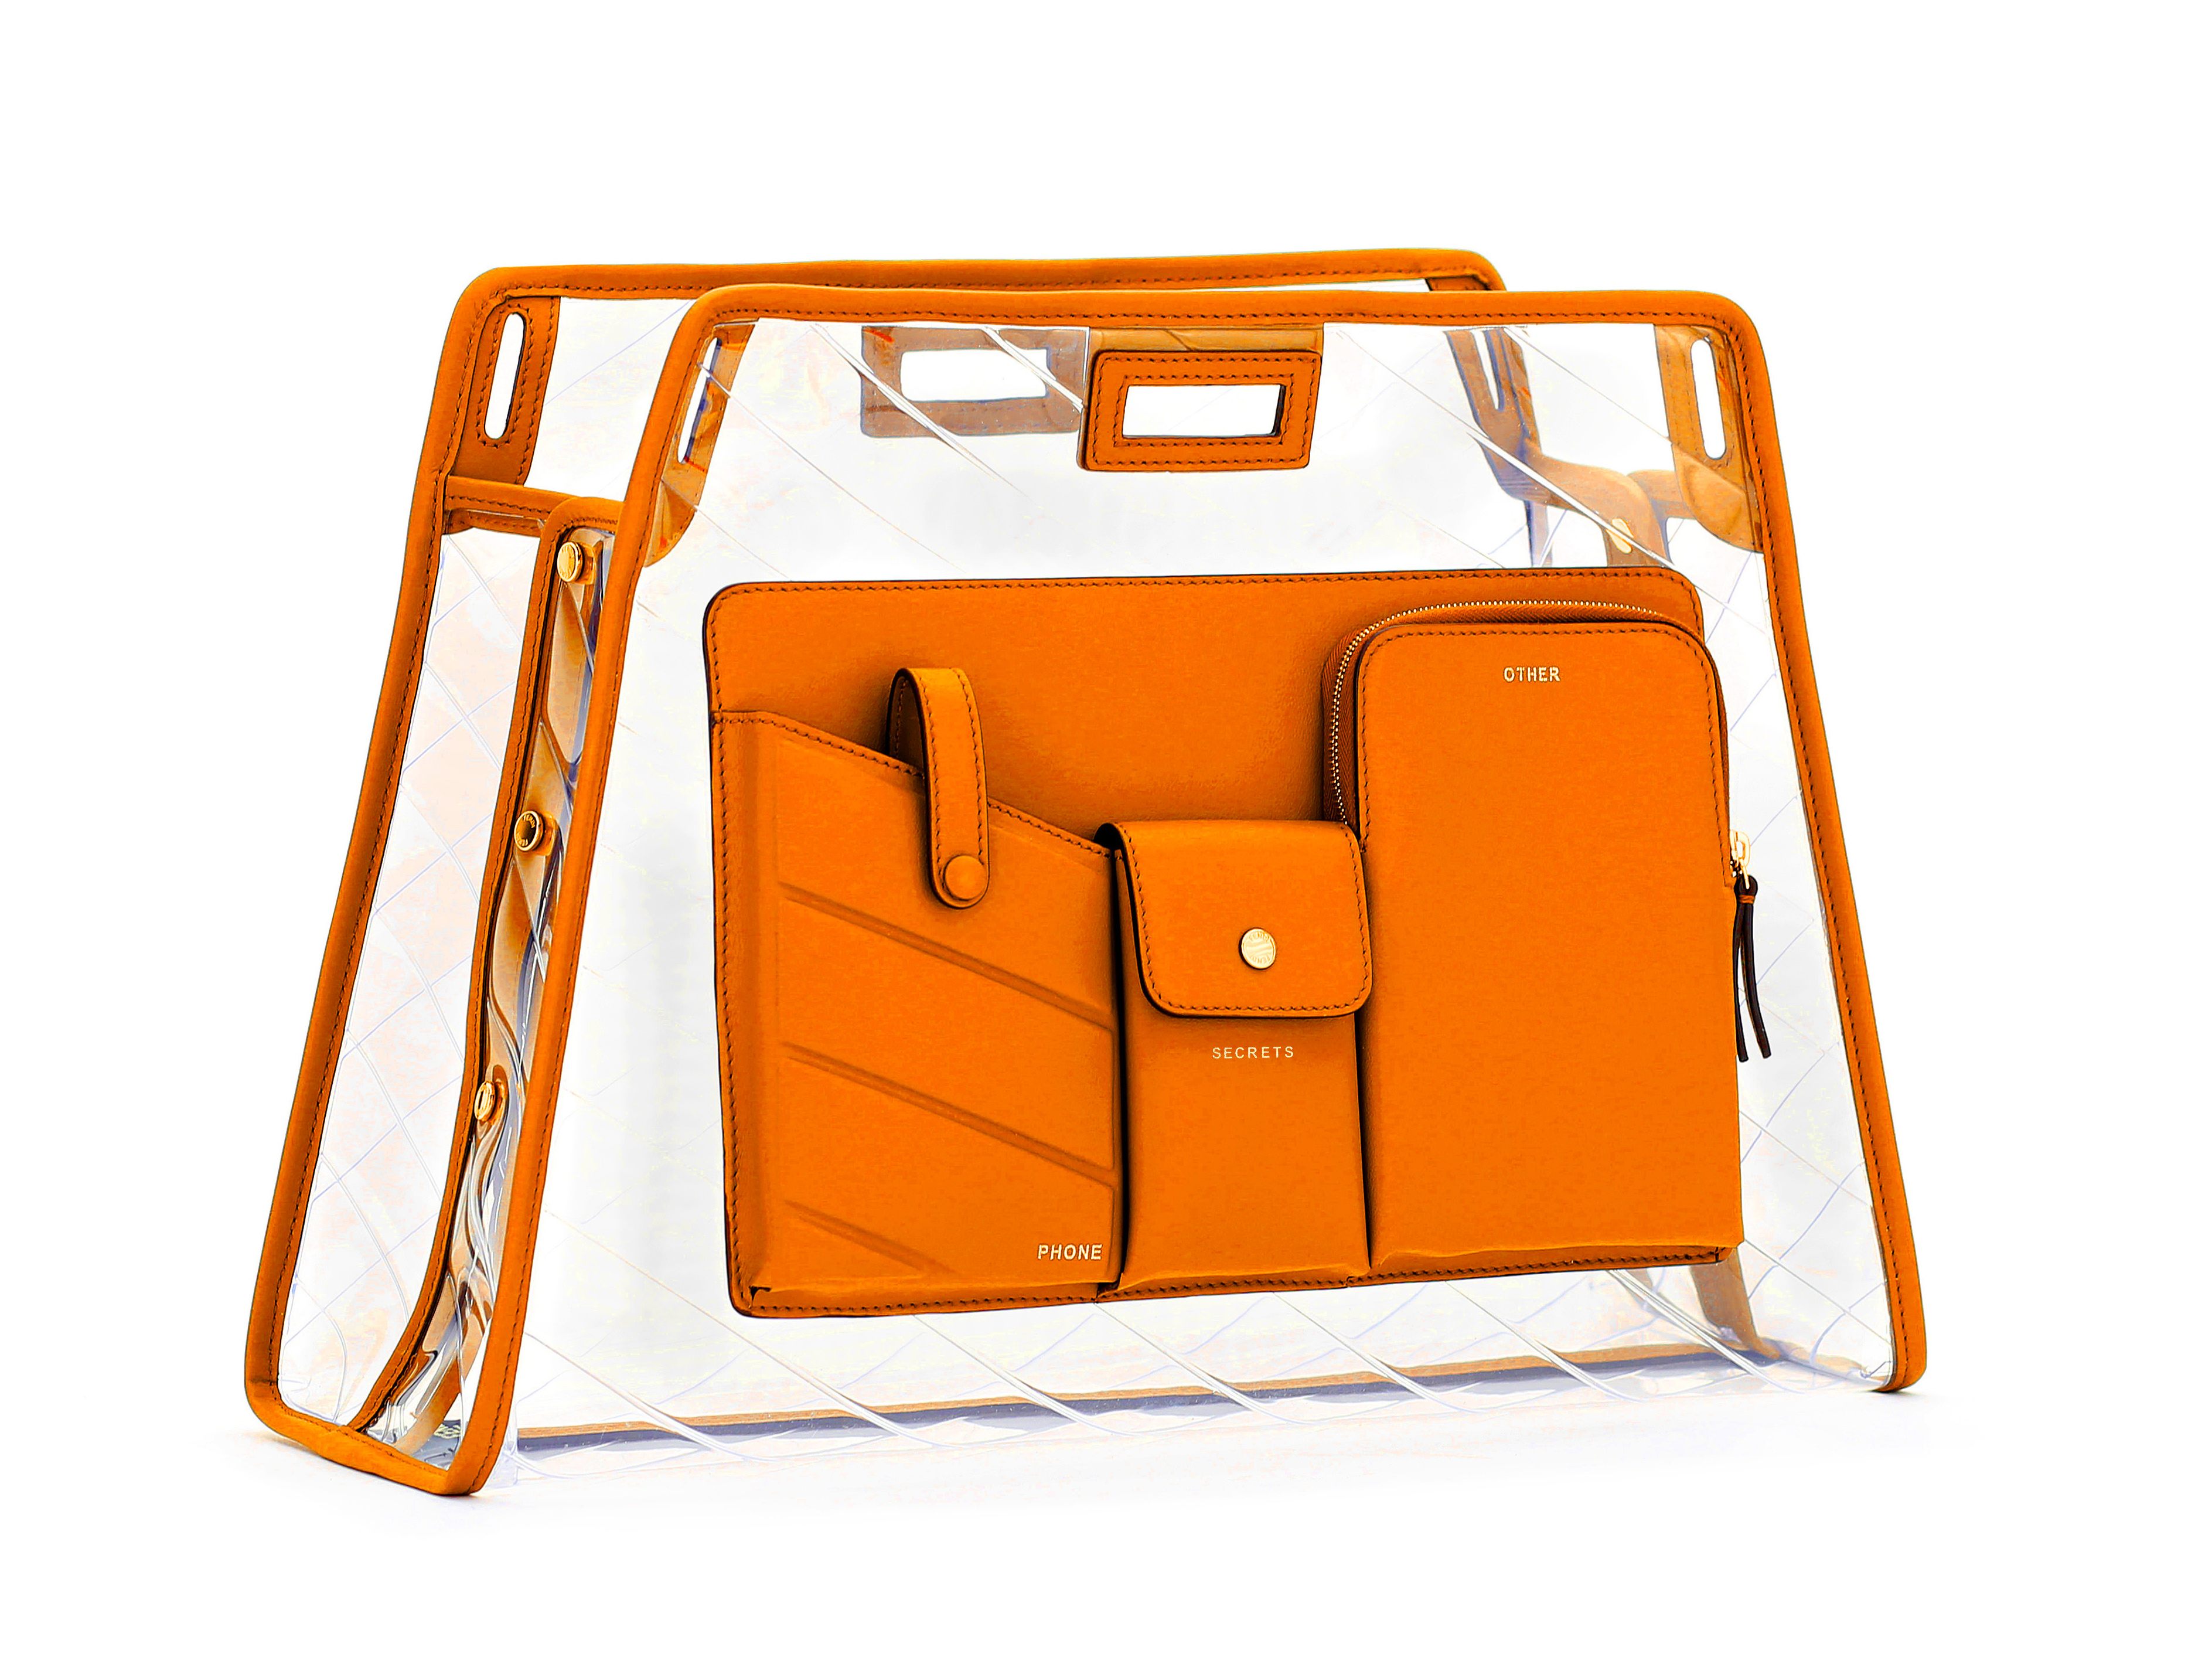 Fendi clear bag cover with orange leather pockets